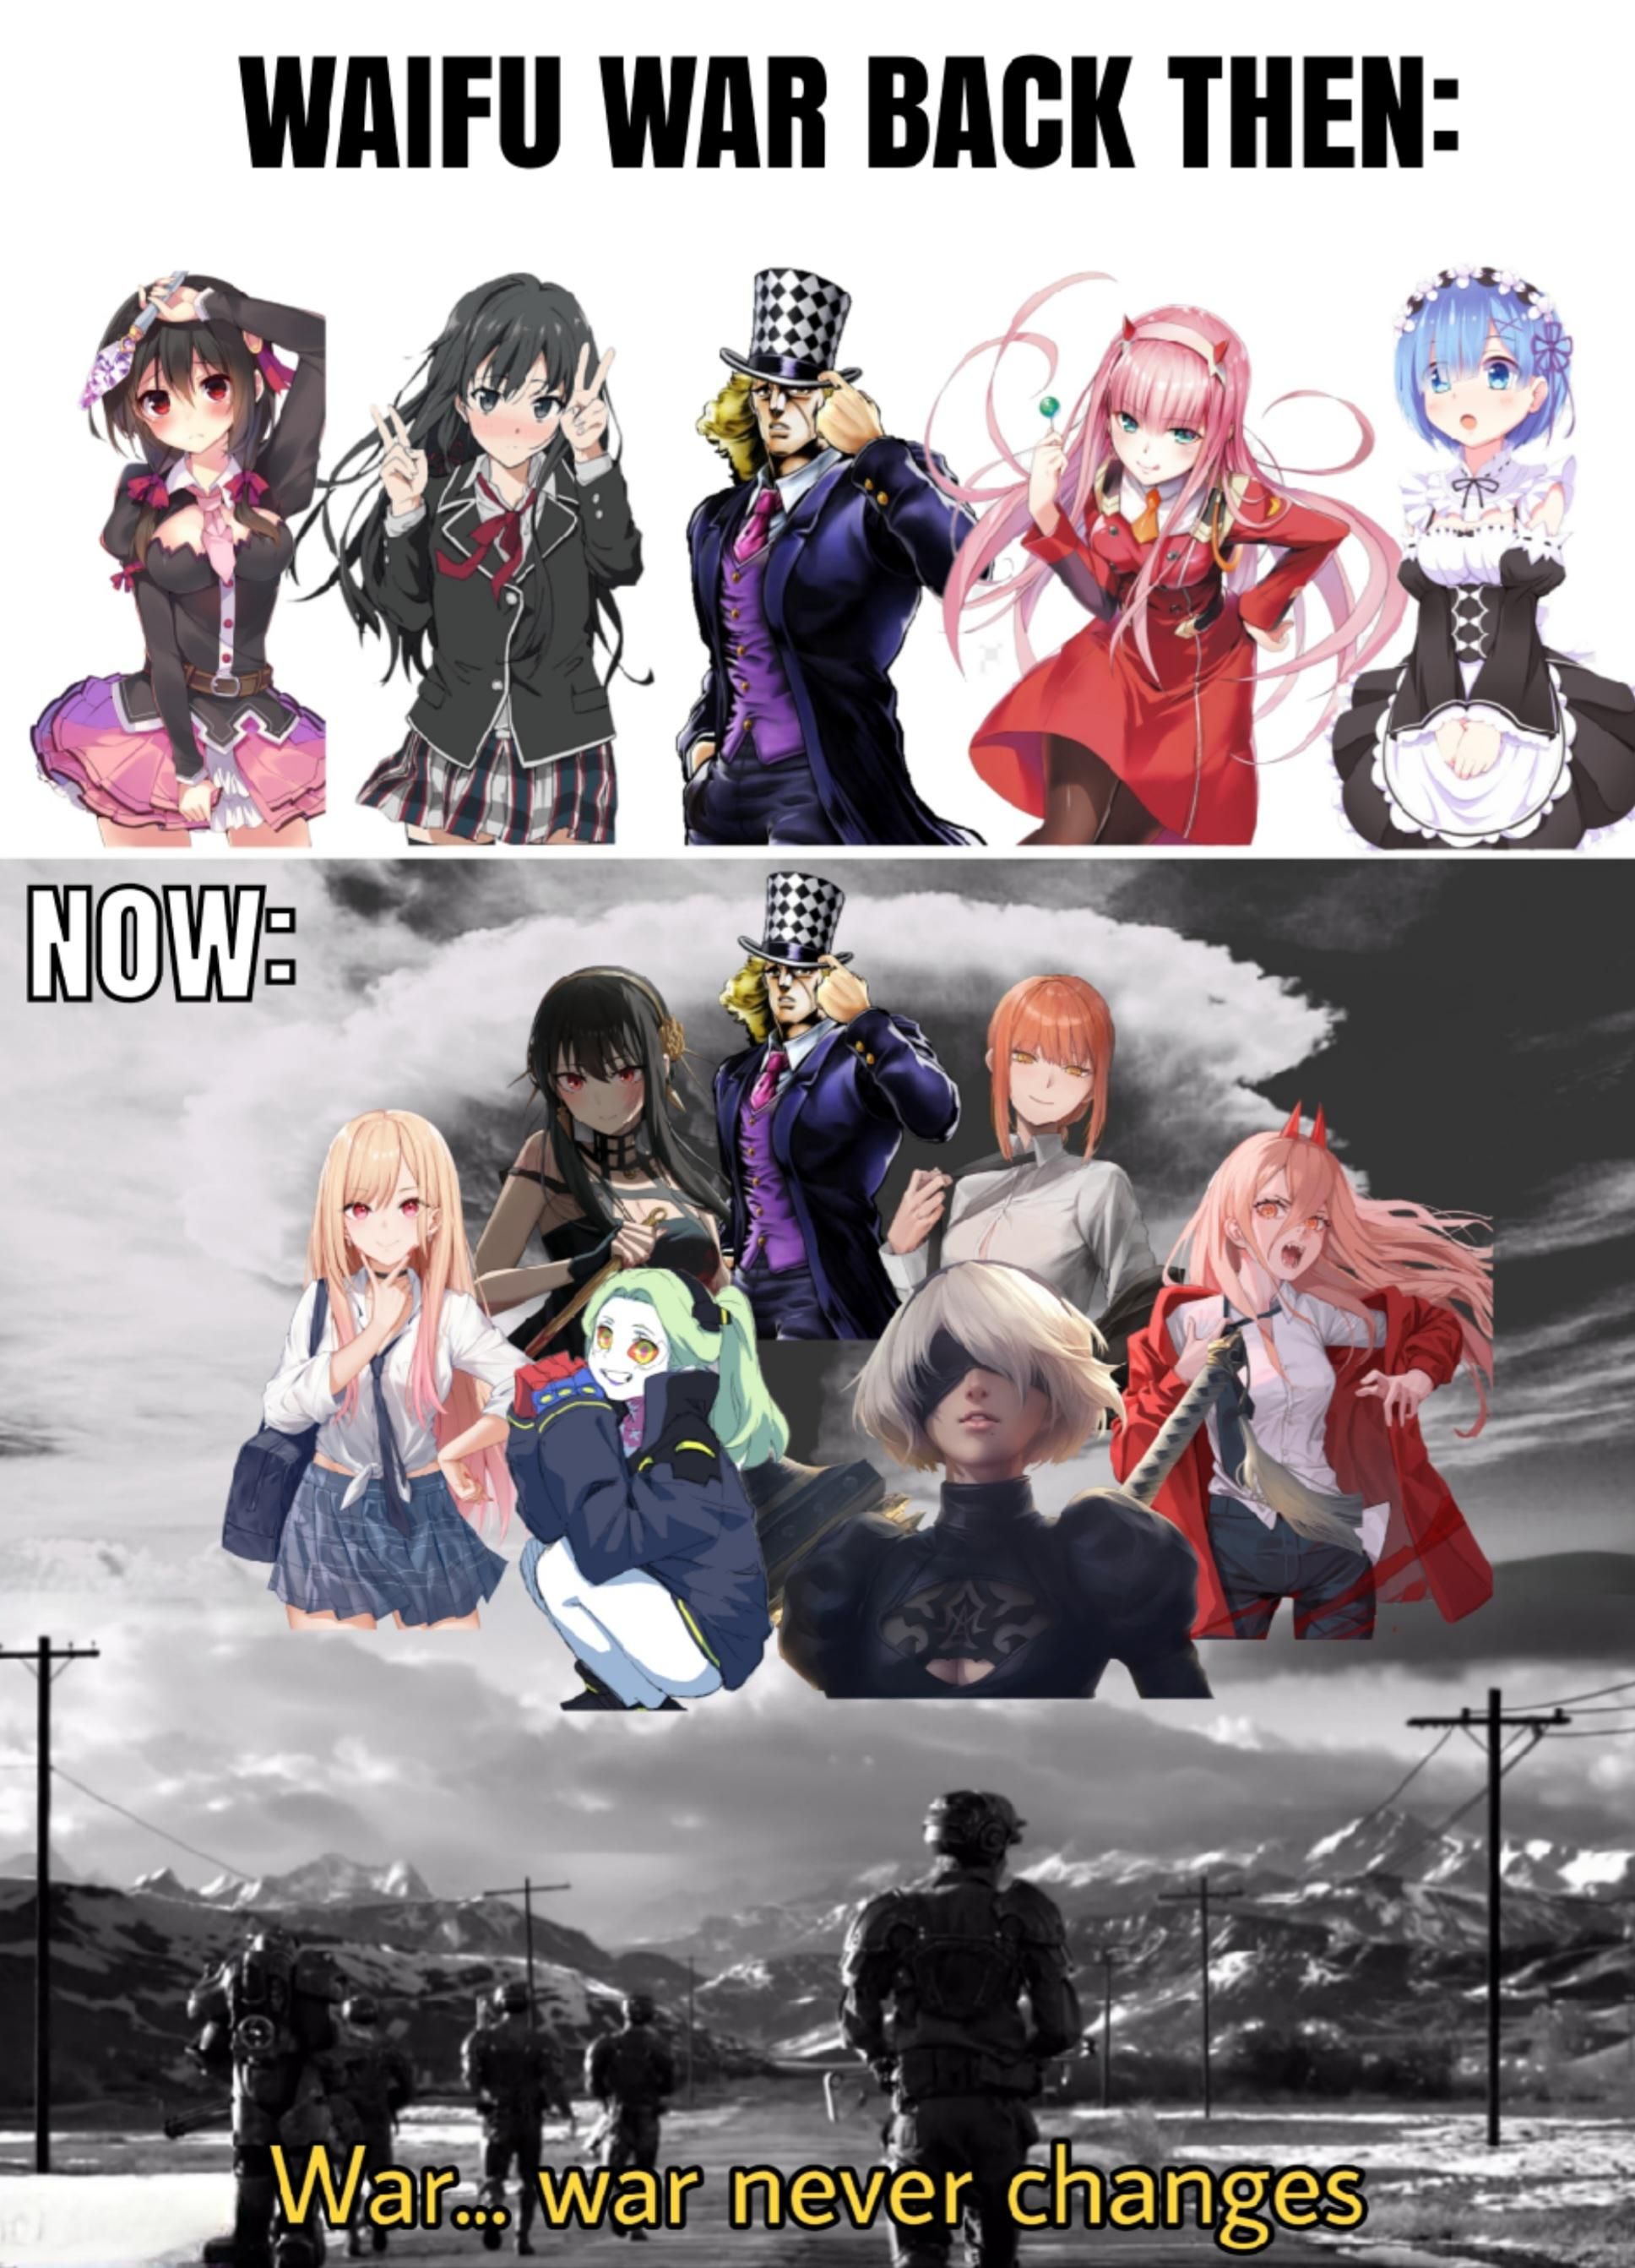 Endlessly, the waifu war will continue